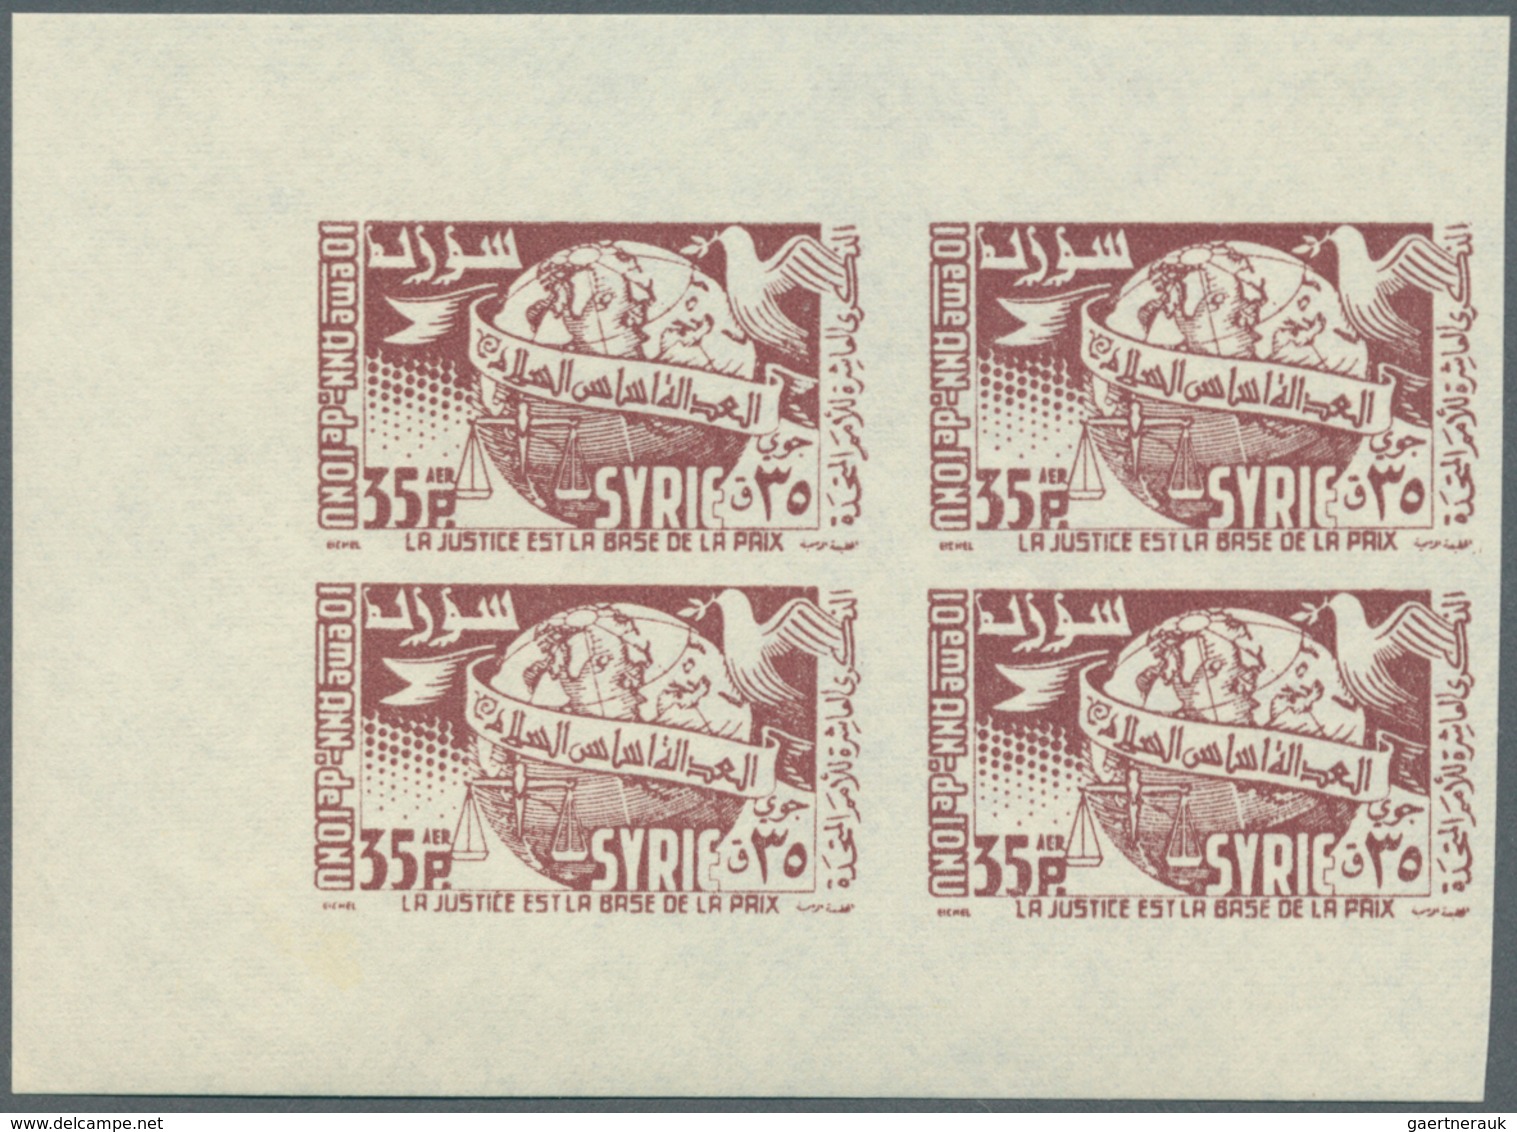 09920 Syrien: 1955, 10th Anniversary of U.N., IMPERFORATE COLOUR PROOFS, complete set each as marginal blo